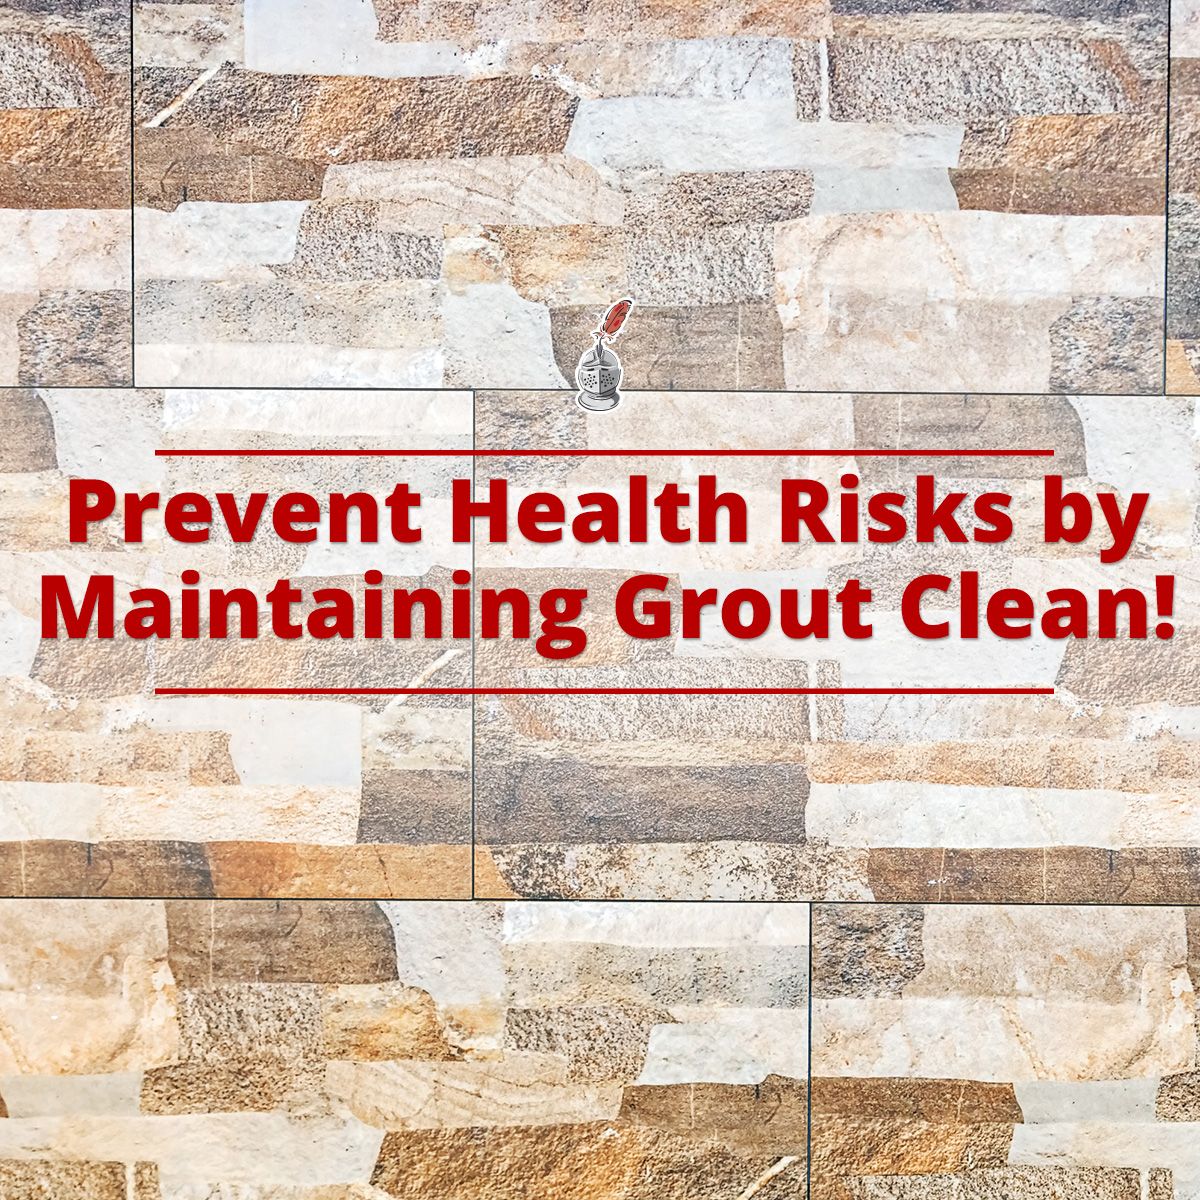 Prevent Health Risks by Maintaining Grout Clean!